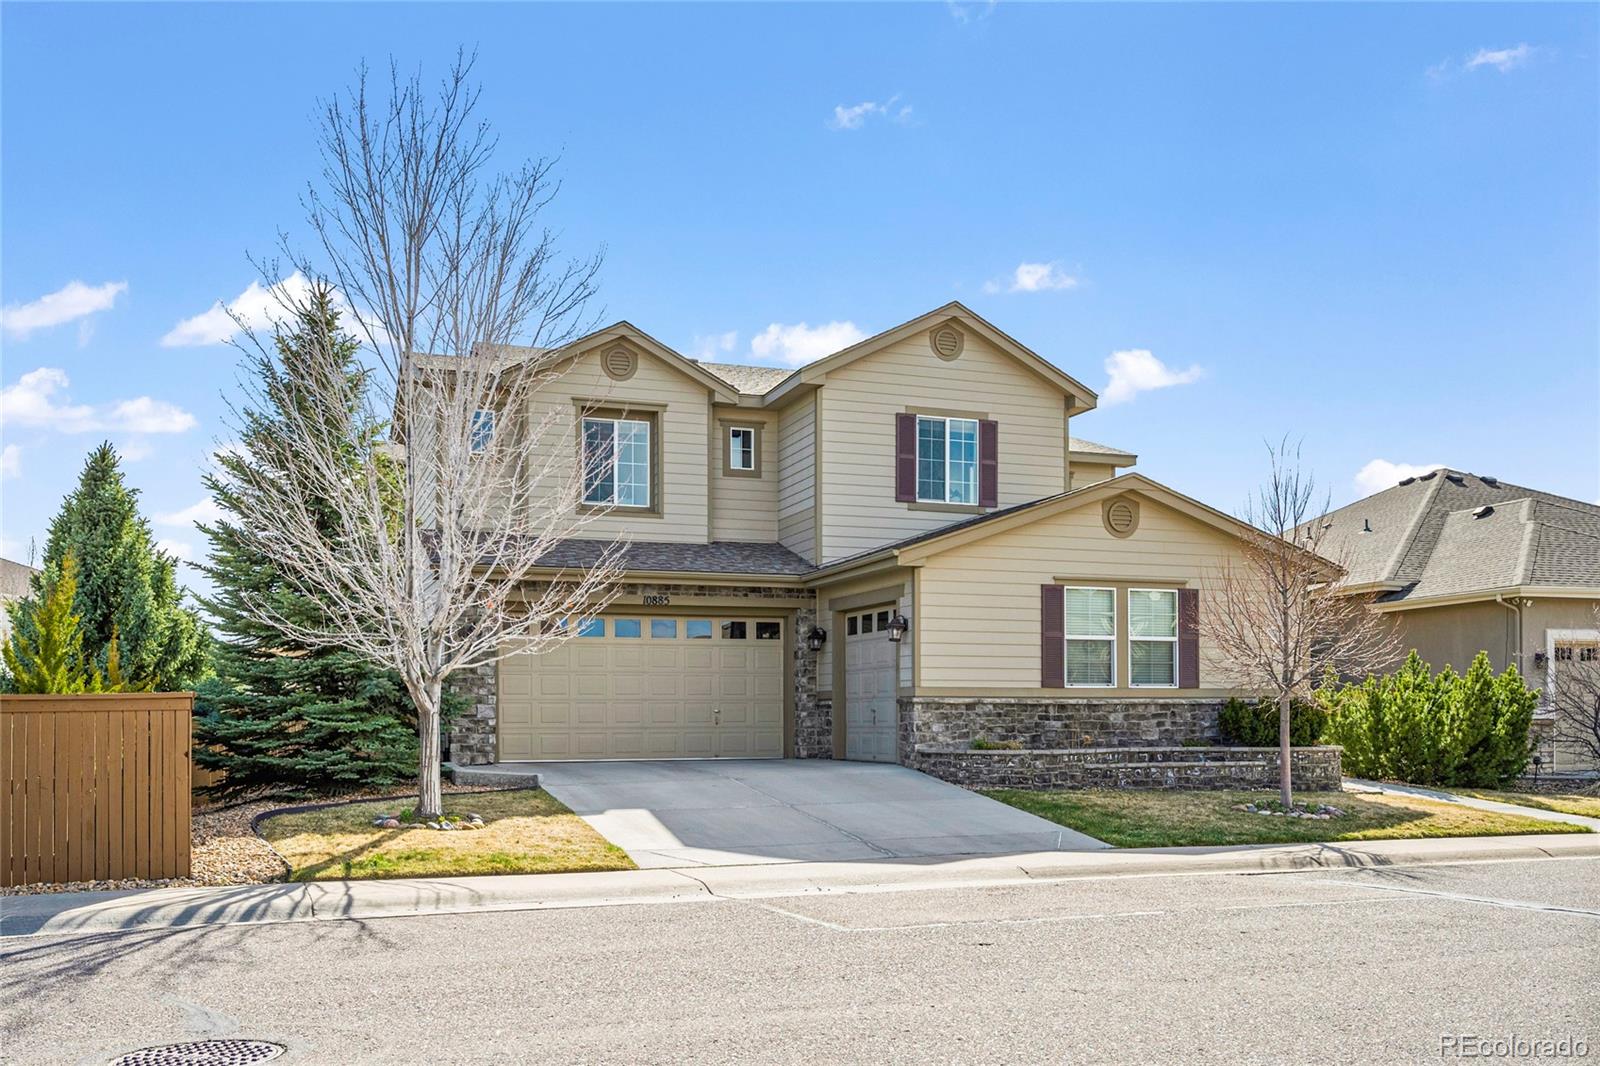 10885  glengate circle, Highlands Ranch sold home. Closed on 2024-05-22 for $1,100,000.